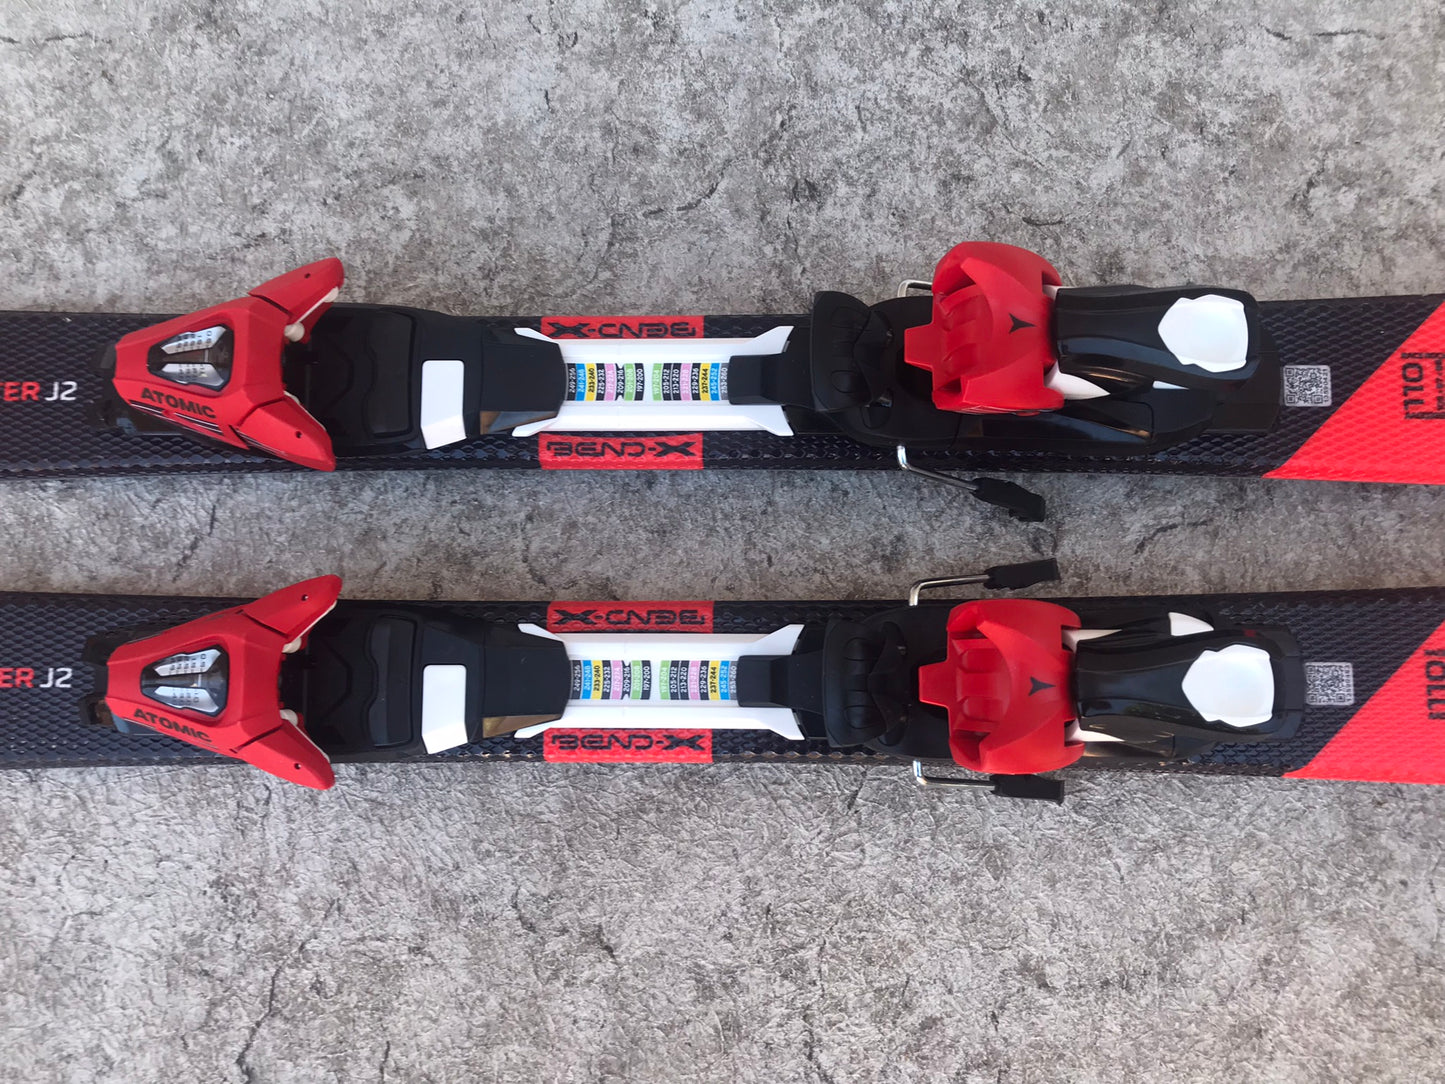 Ski 110 Atomic Redster Parabolic With Bindings Black Red Excellent